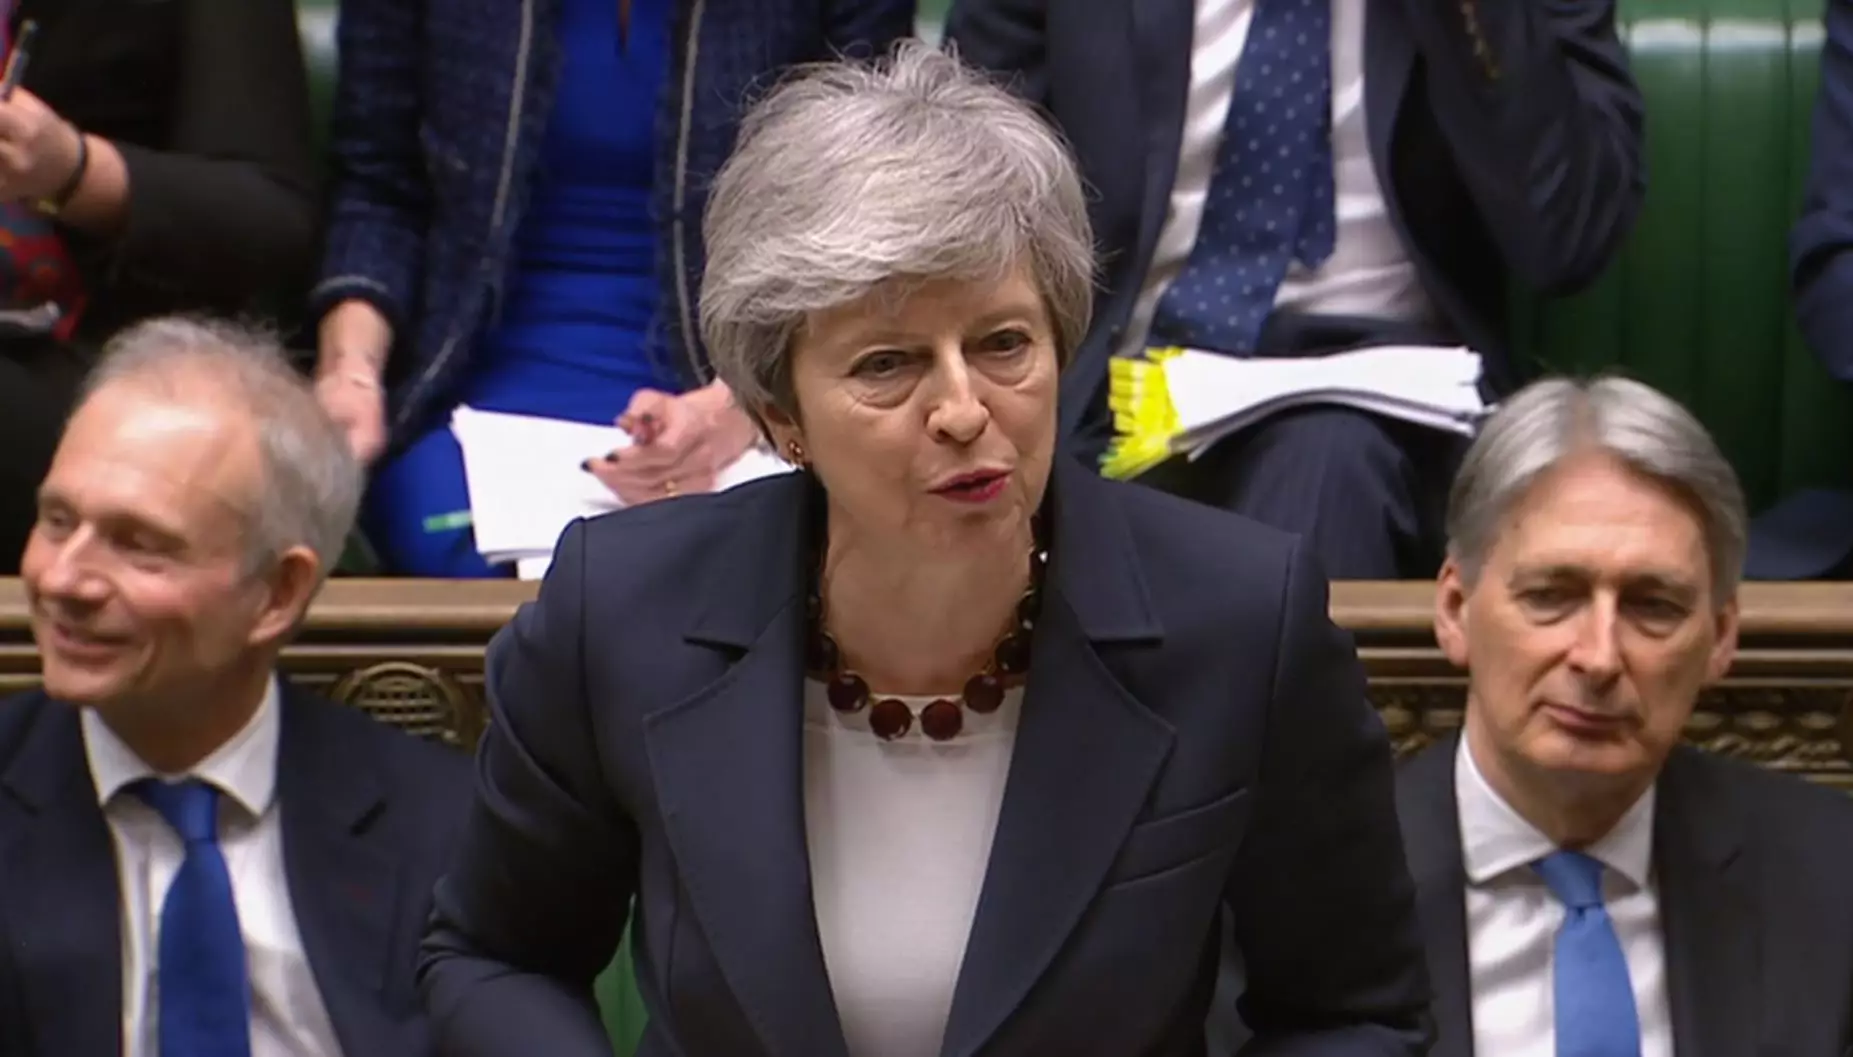 The Prime Minister said she will step down if MPs agree to pass her Brexit deal.